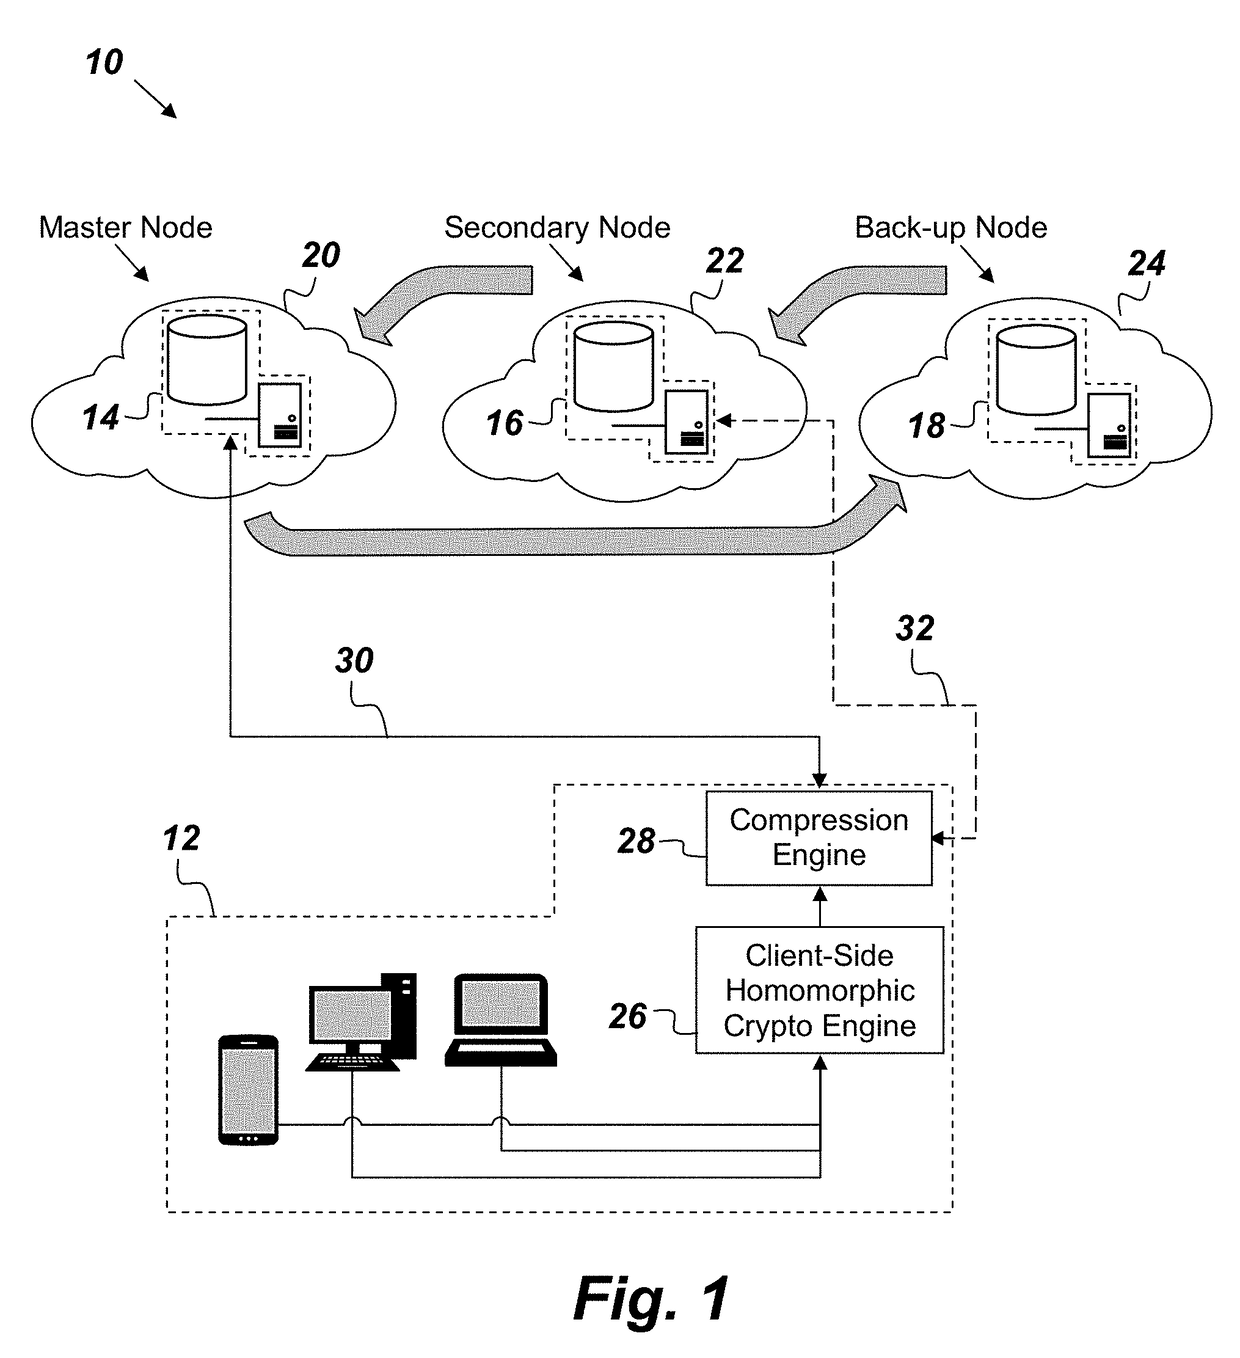 System and method for high-assurance data storage and processing based on homomorphic encryption